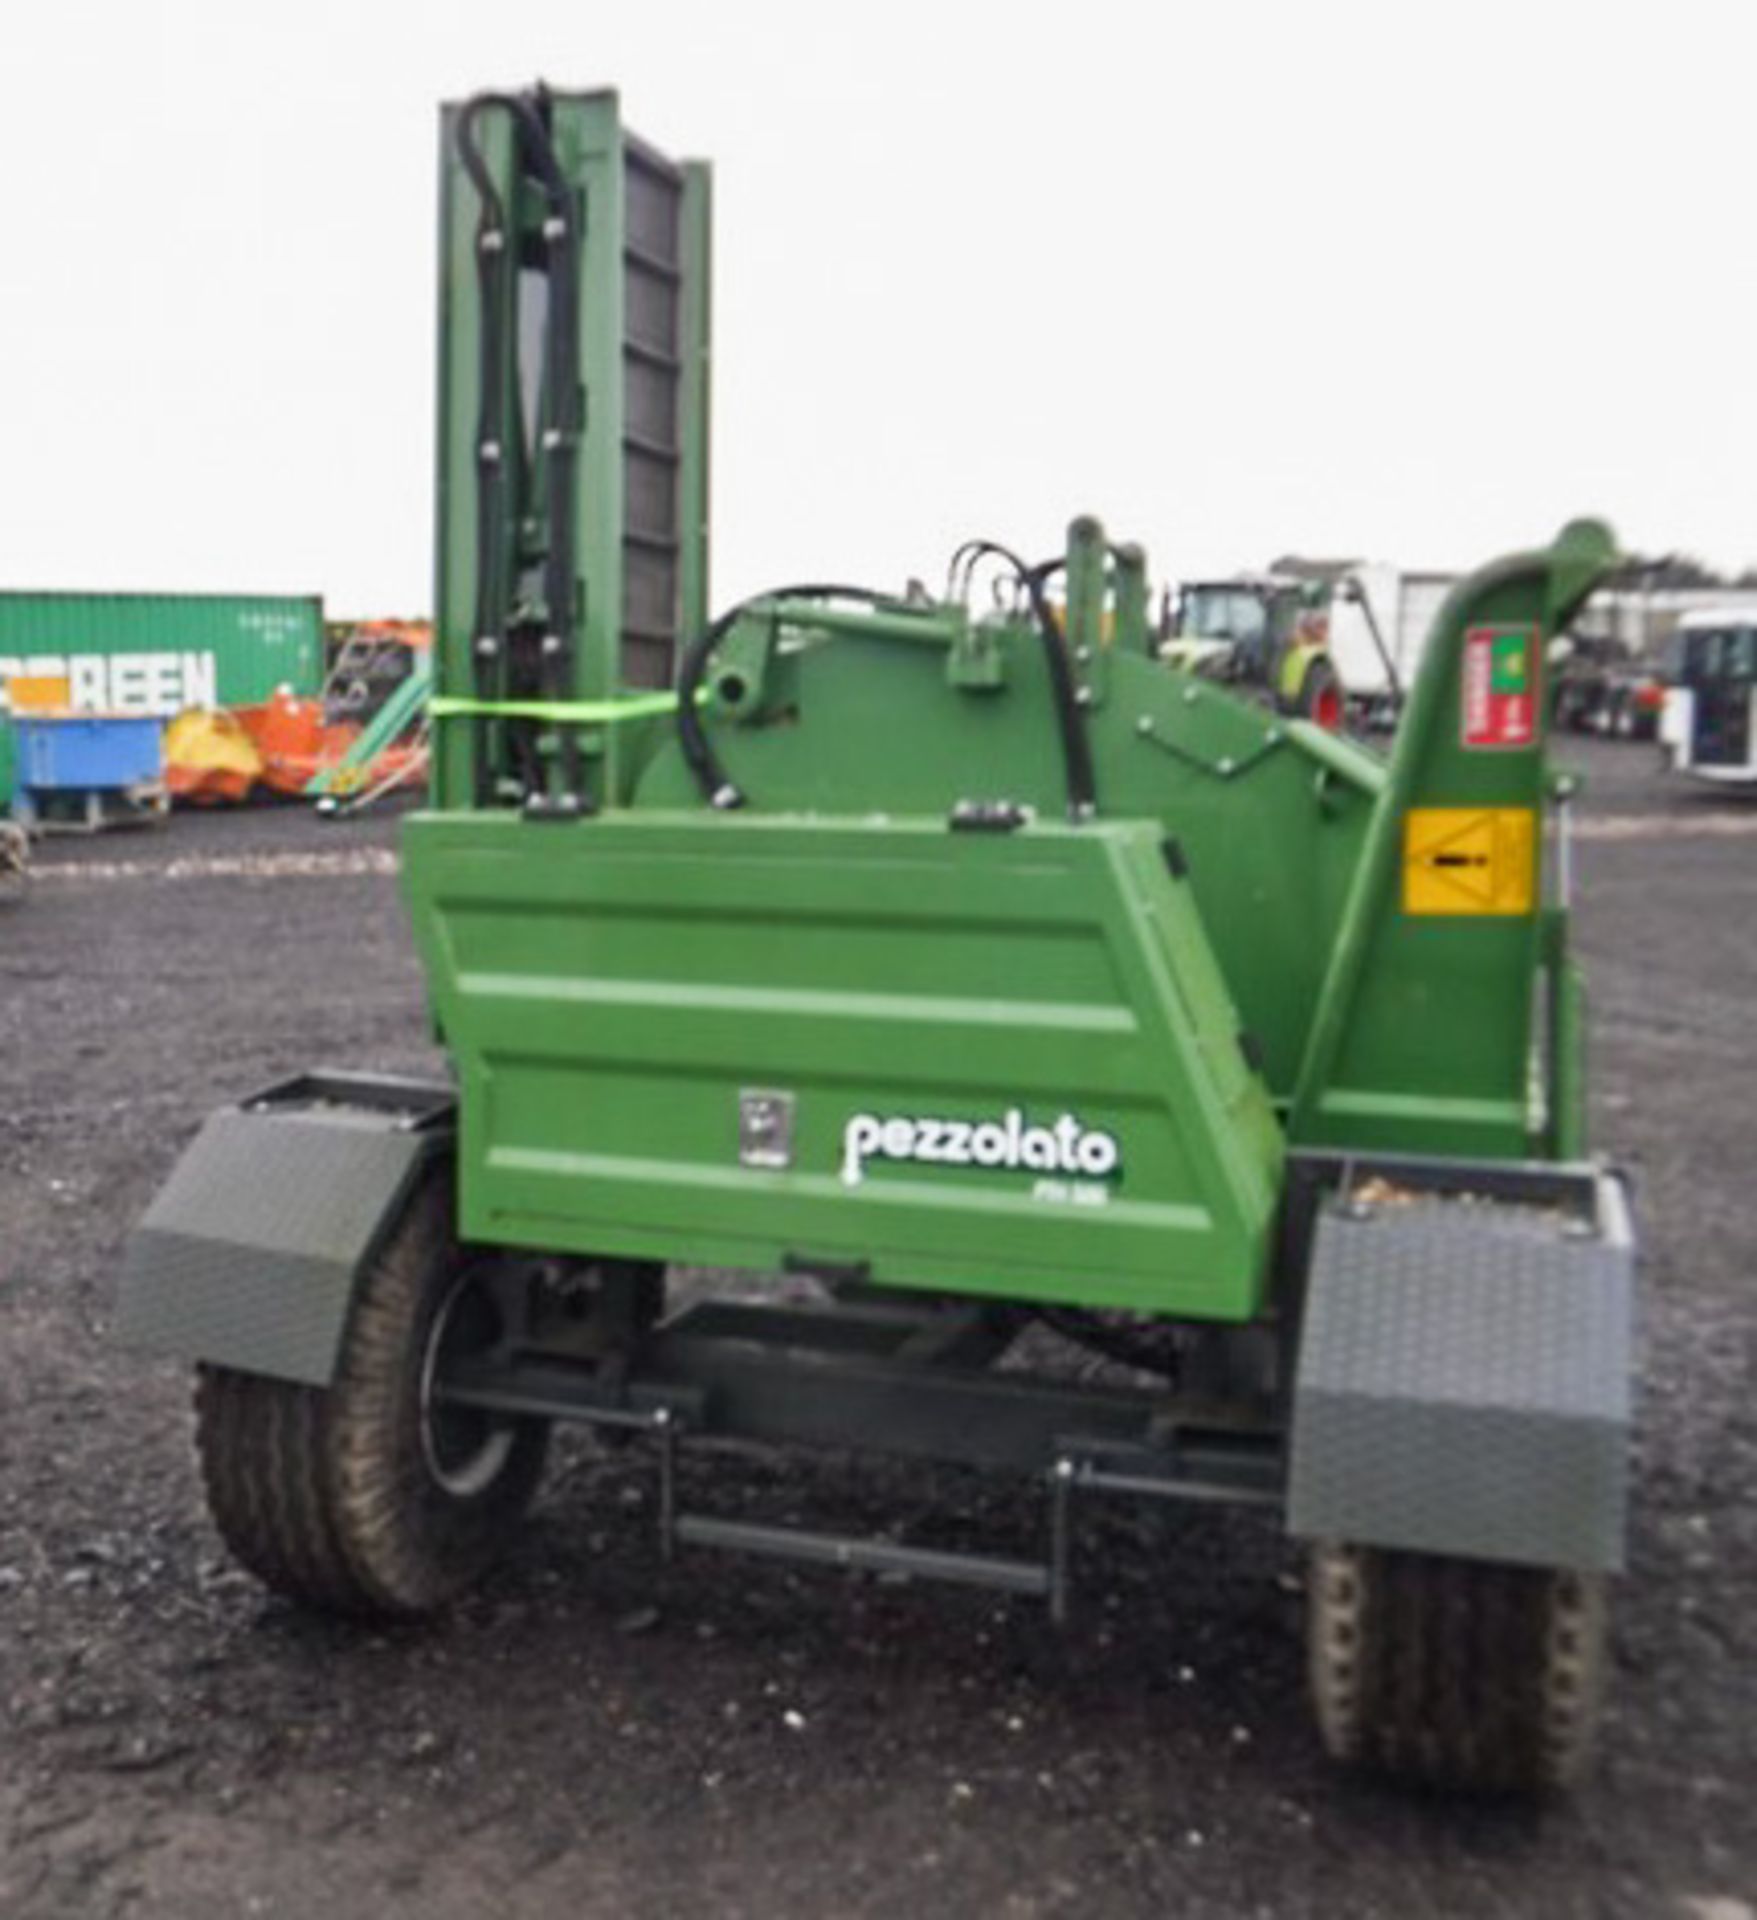 2016 PEZZOLATO PTH 500 WOOD CHIPPER WITH LOADING CONVEYOR BELT, S/N C16188, DETAILS OF REMOTE ETC IN - Image 5 of 11